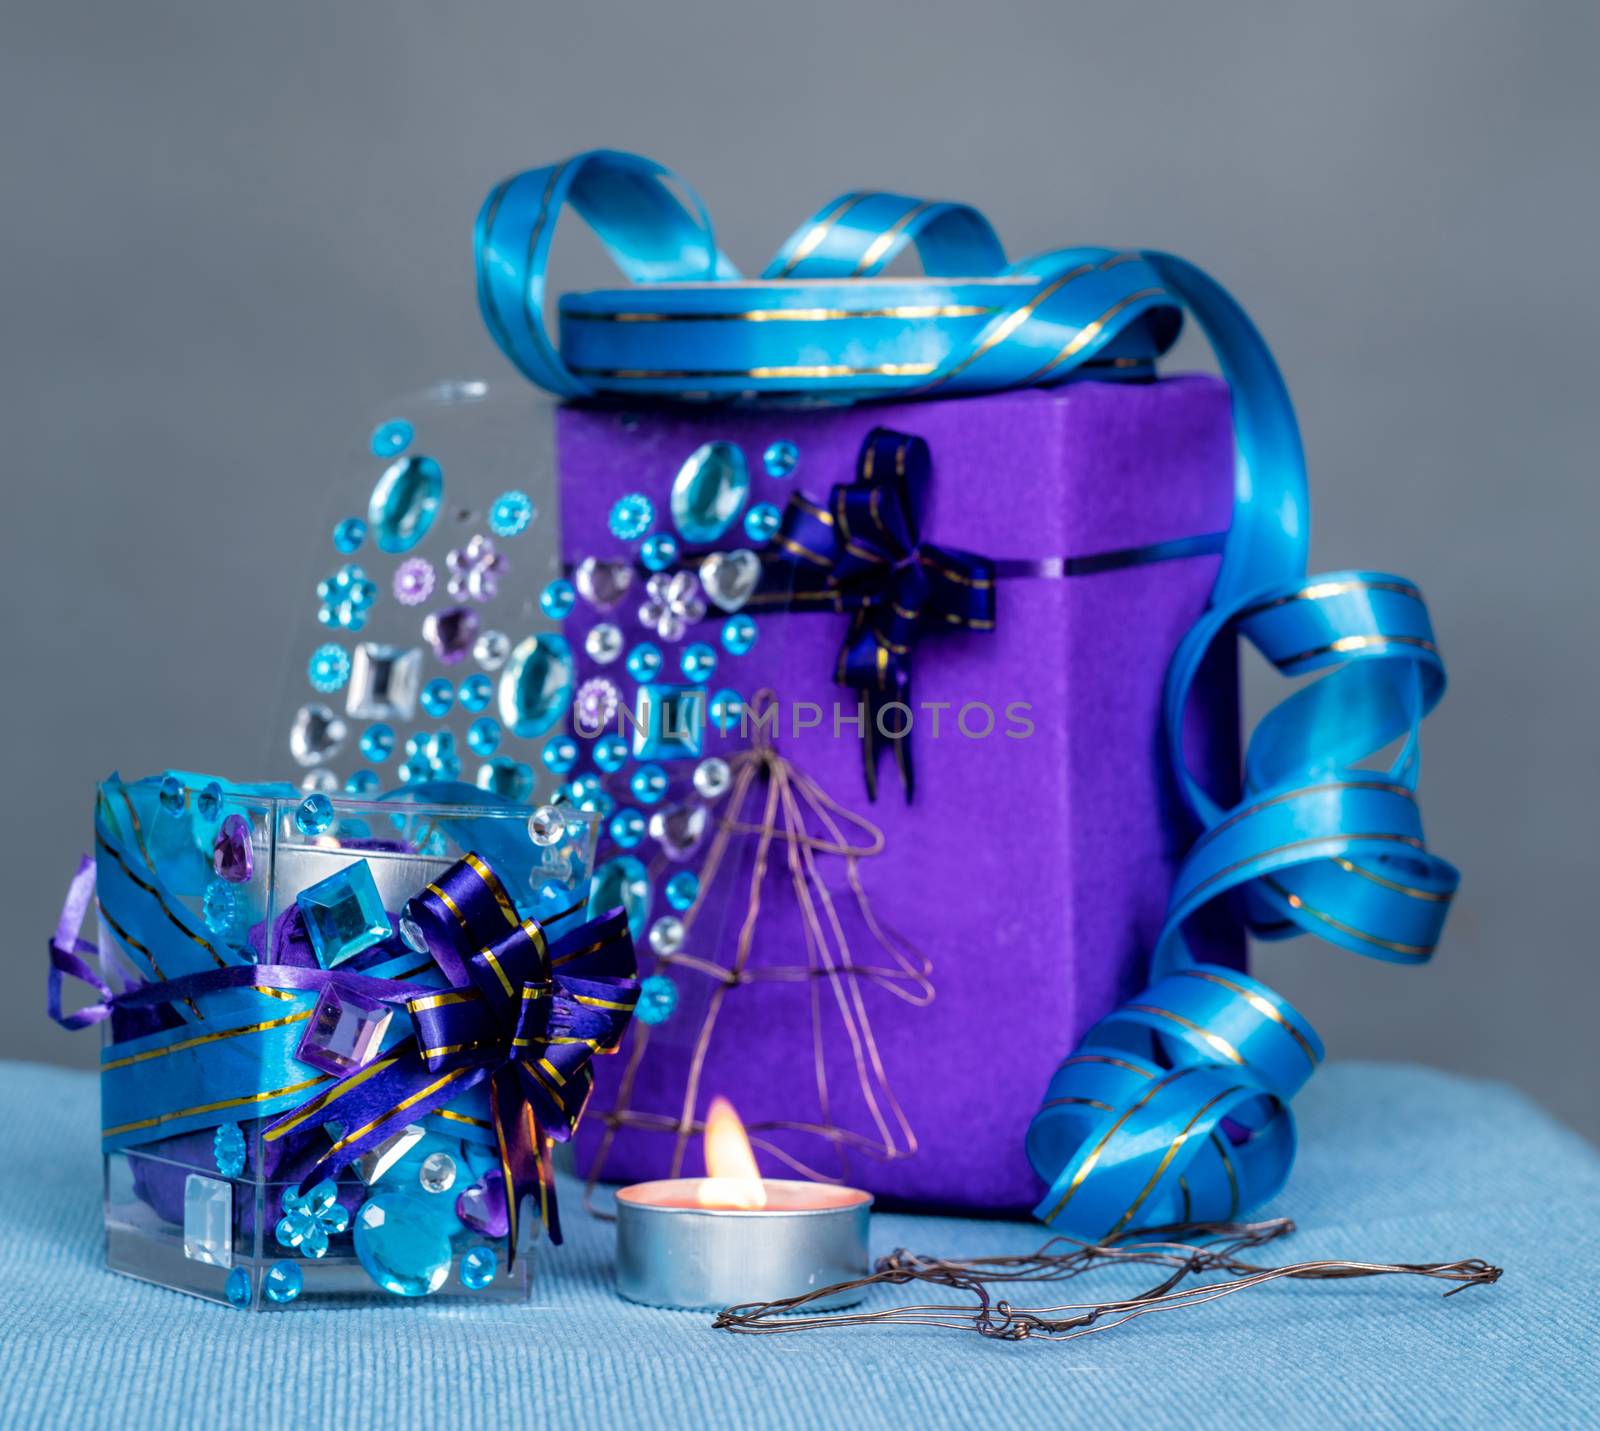 christmas craft composition on the blue tablecloth. candle with gems and blue ribbon, a gift and xmas tree decorations